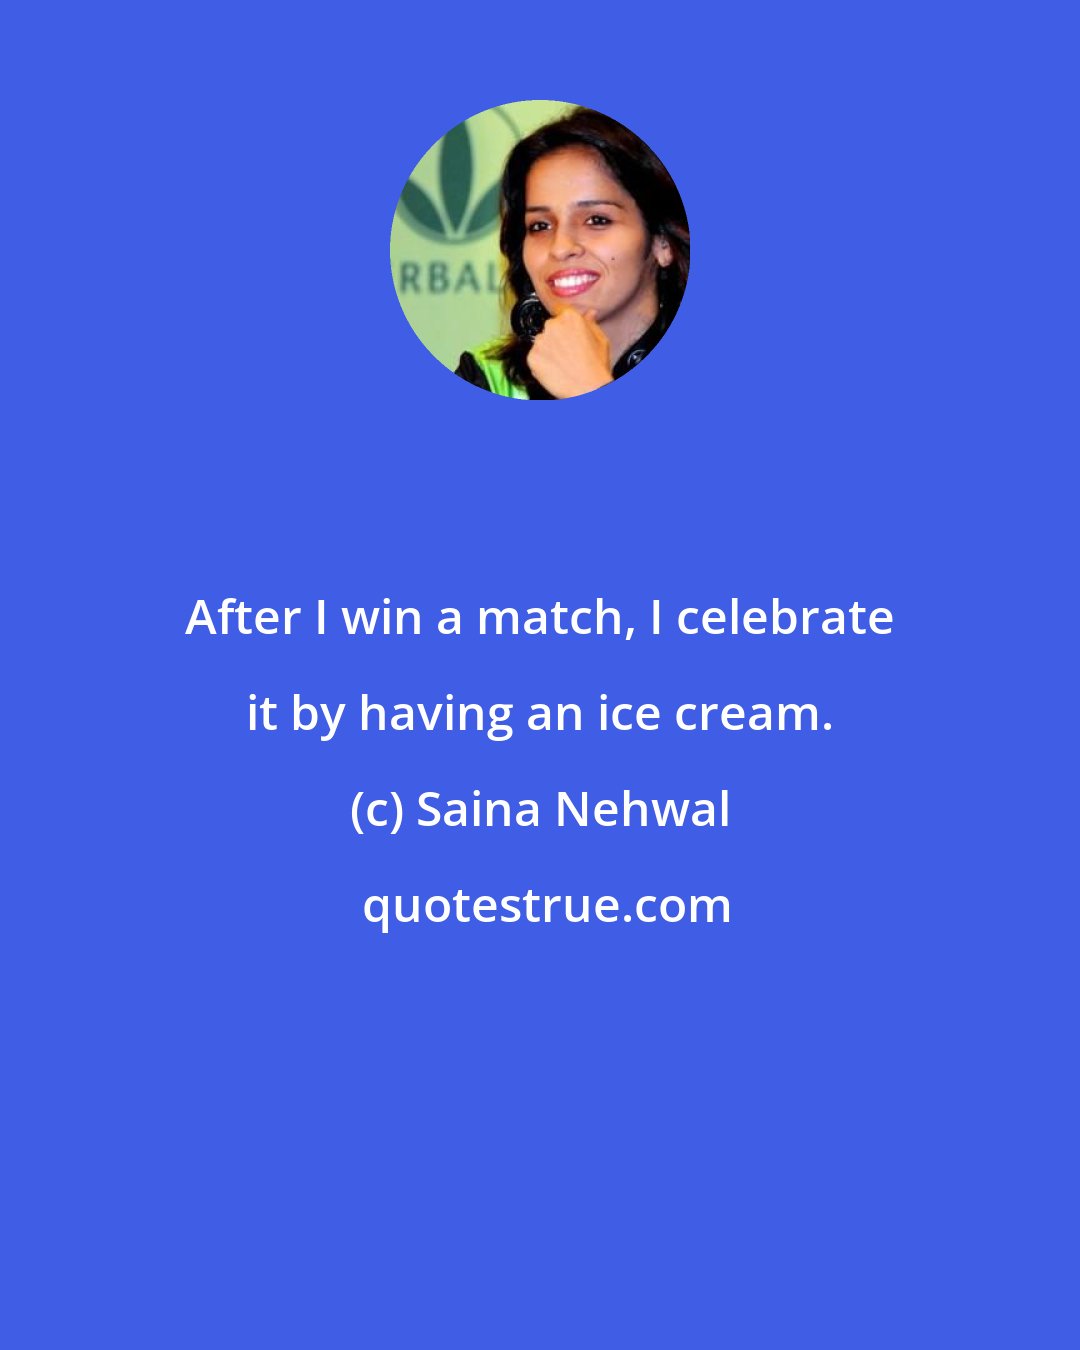 Saina Nehwal: After I win a match, I celebrate it by having an ice cream.